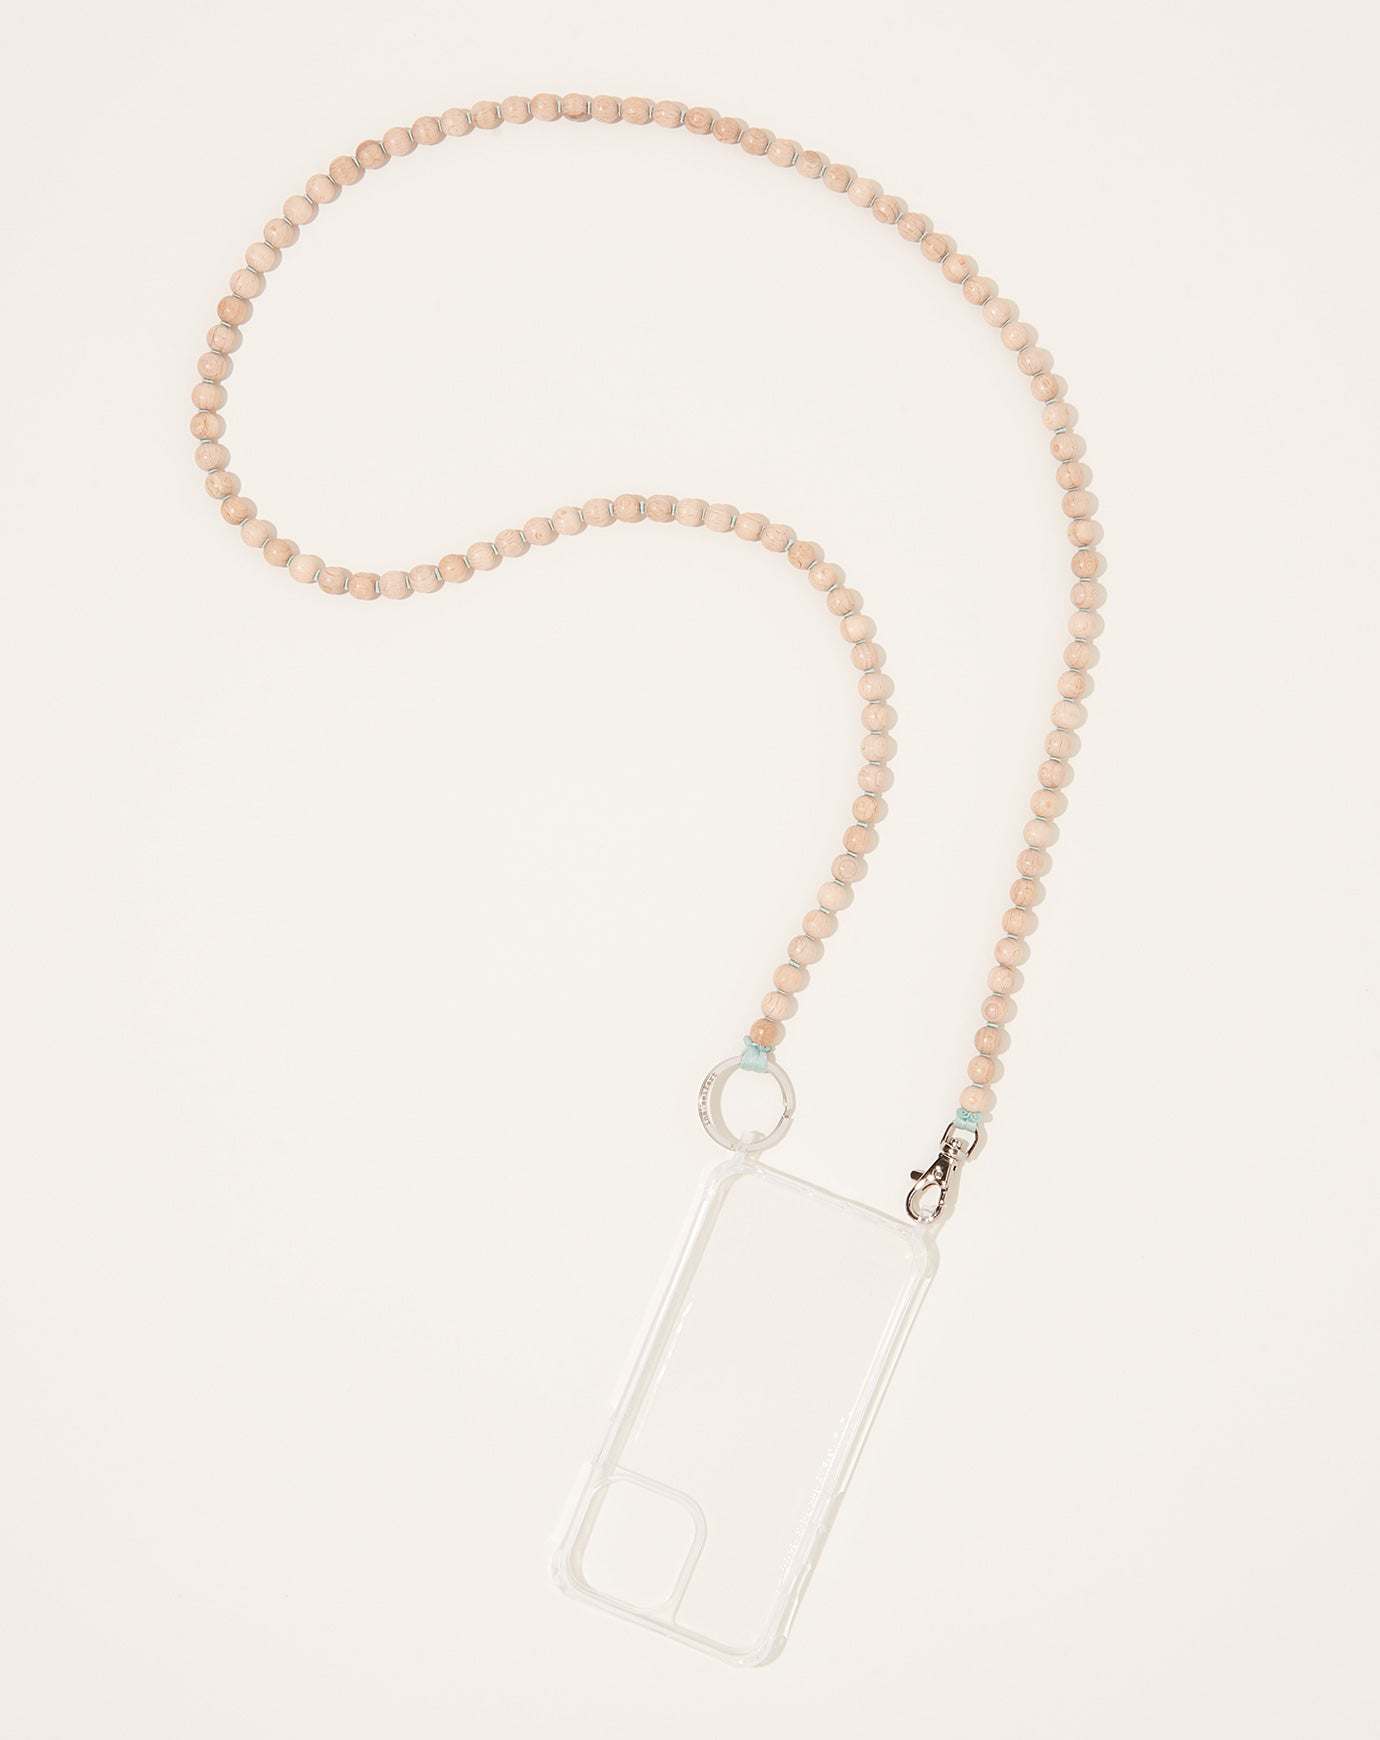 Ina Seifart Handykette iPhone Necklace in Natural on Salvia